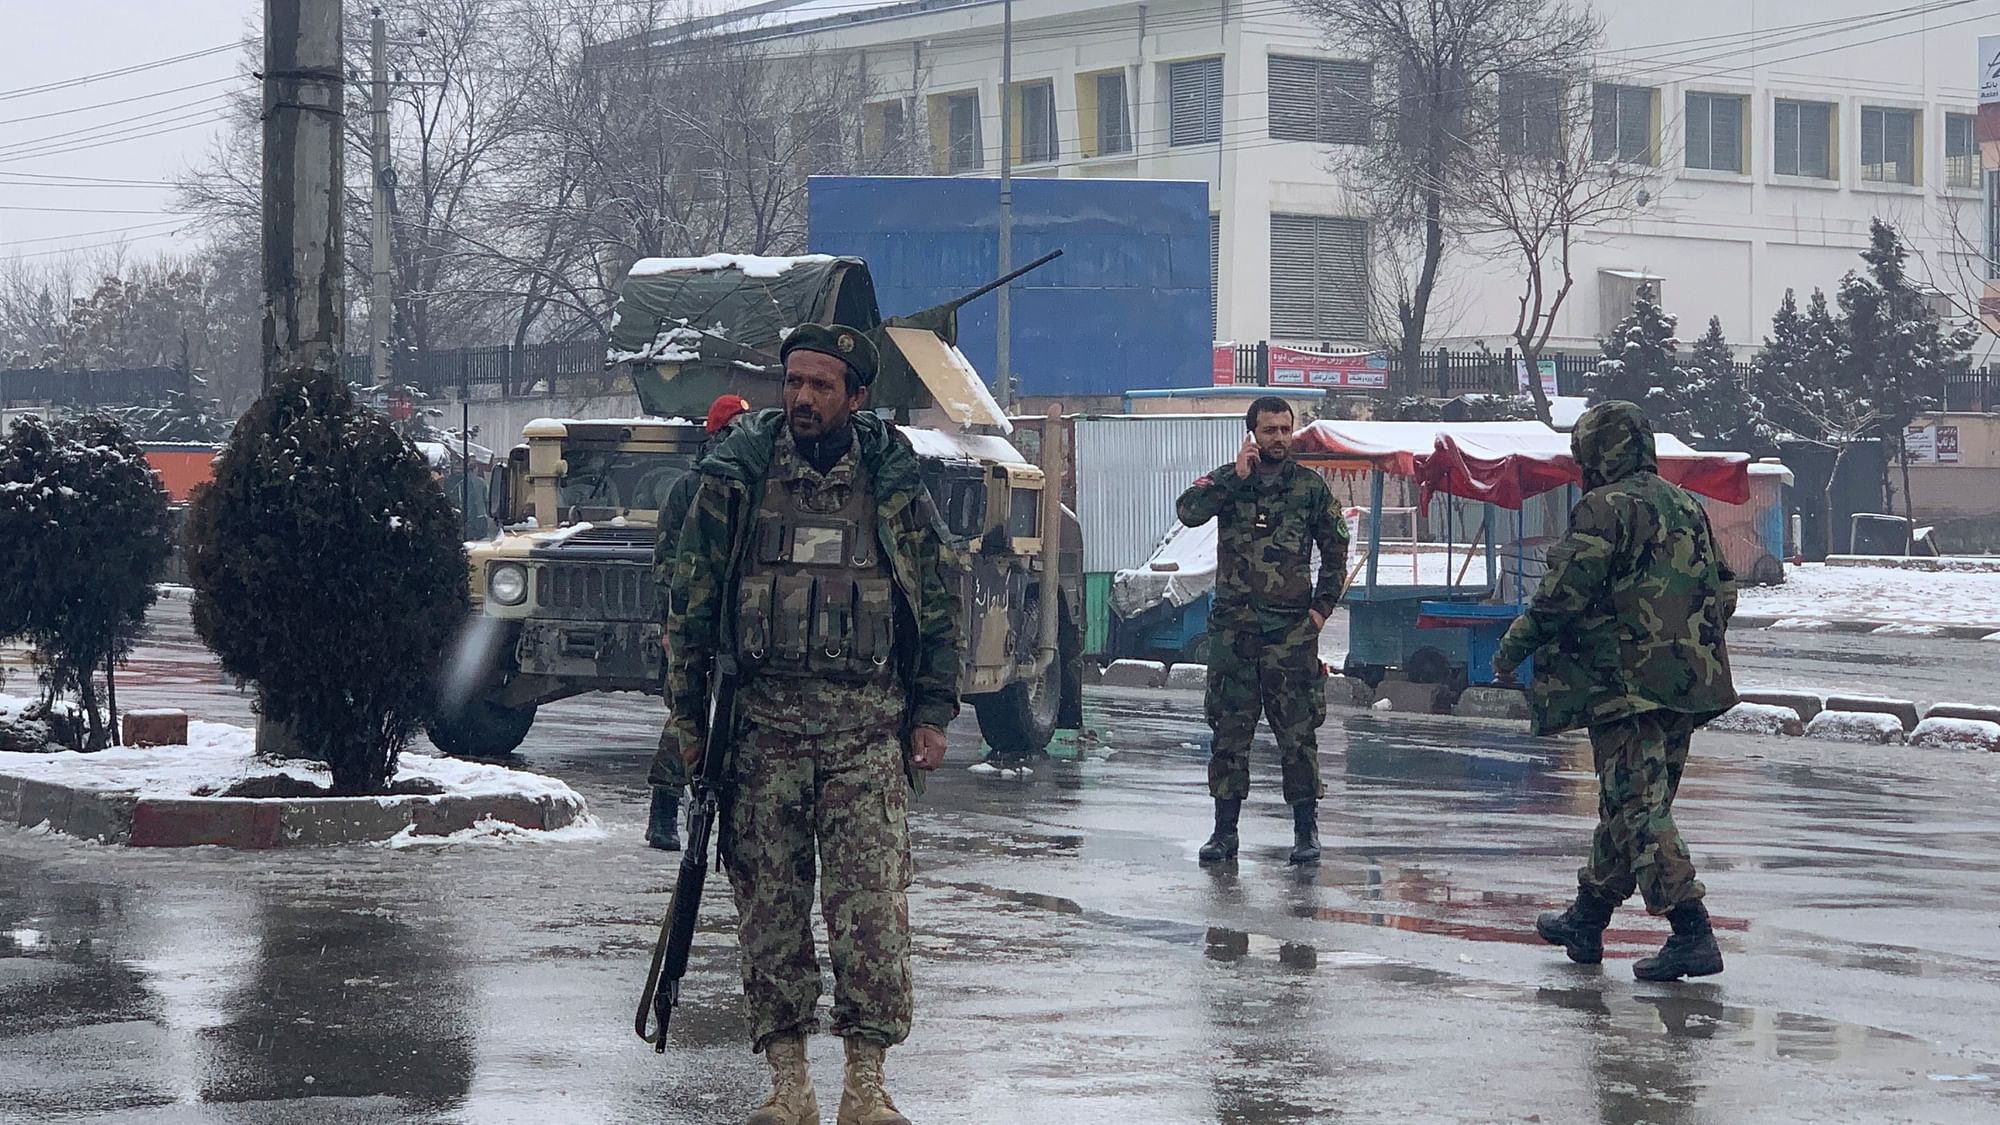 National army soldiers arrive at the site of explosion near the military academy in Kabul, Afghanistan on Tuesday, 11 February.